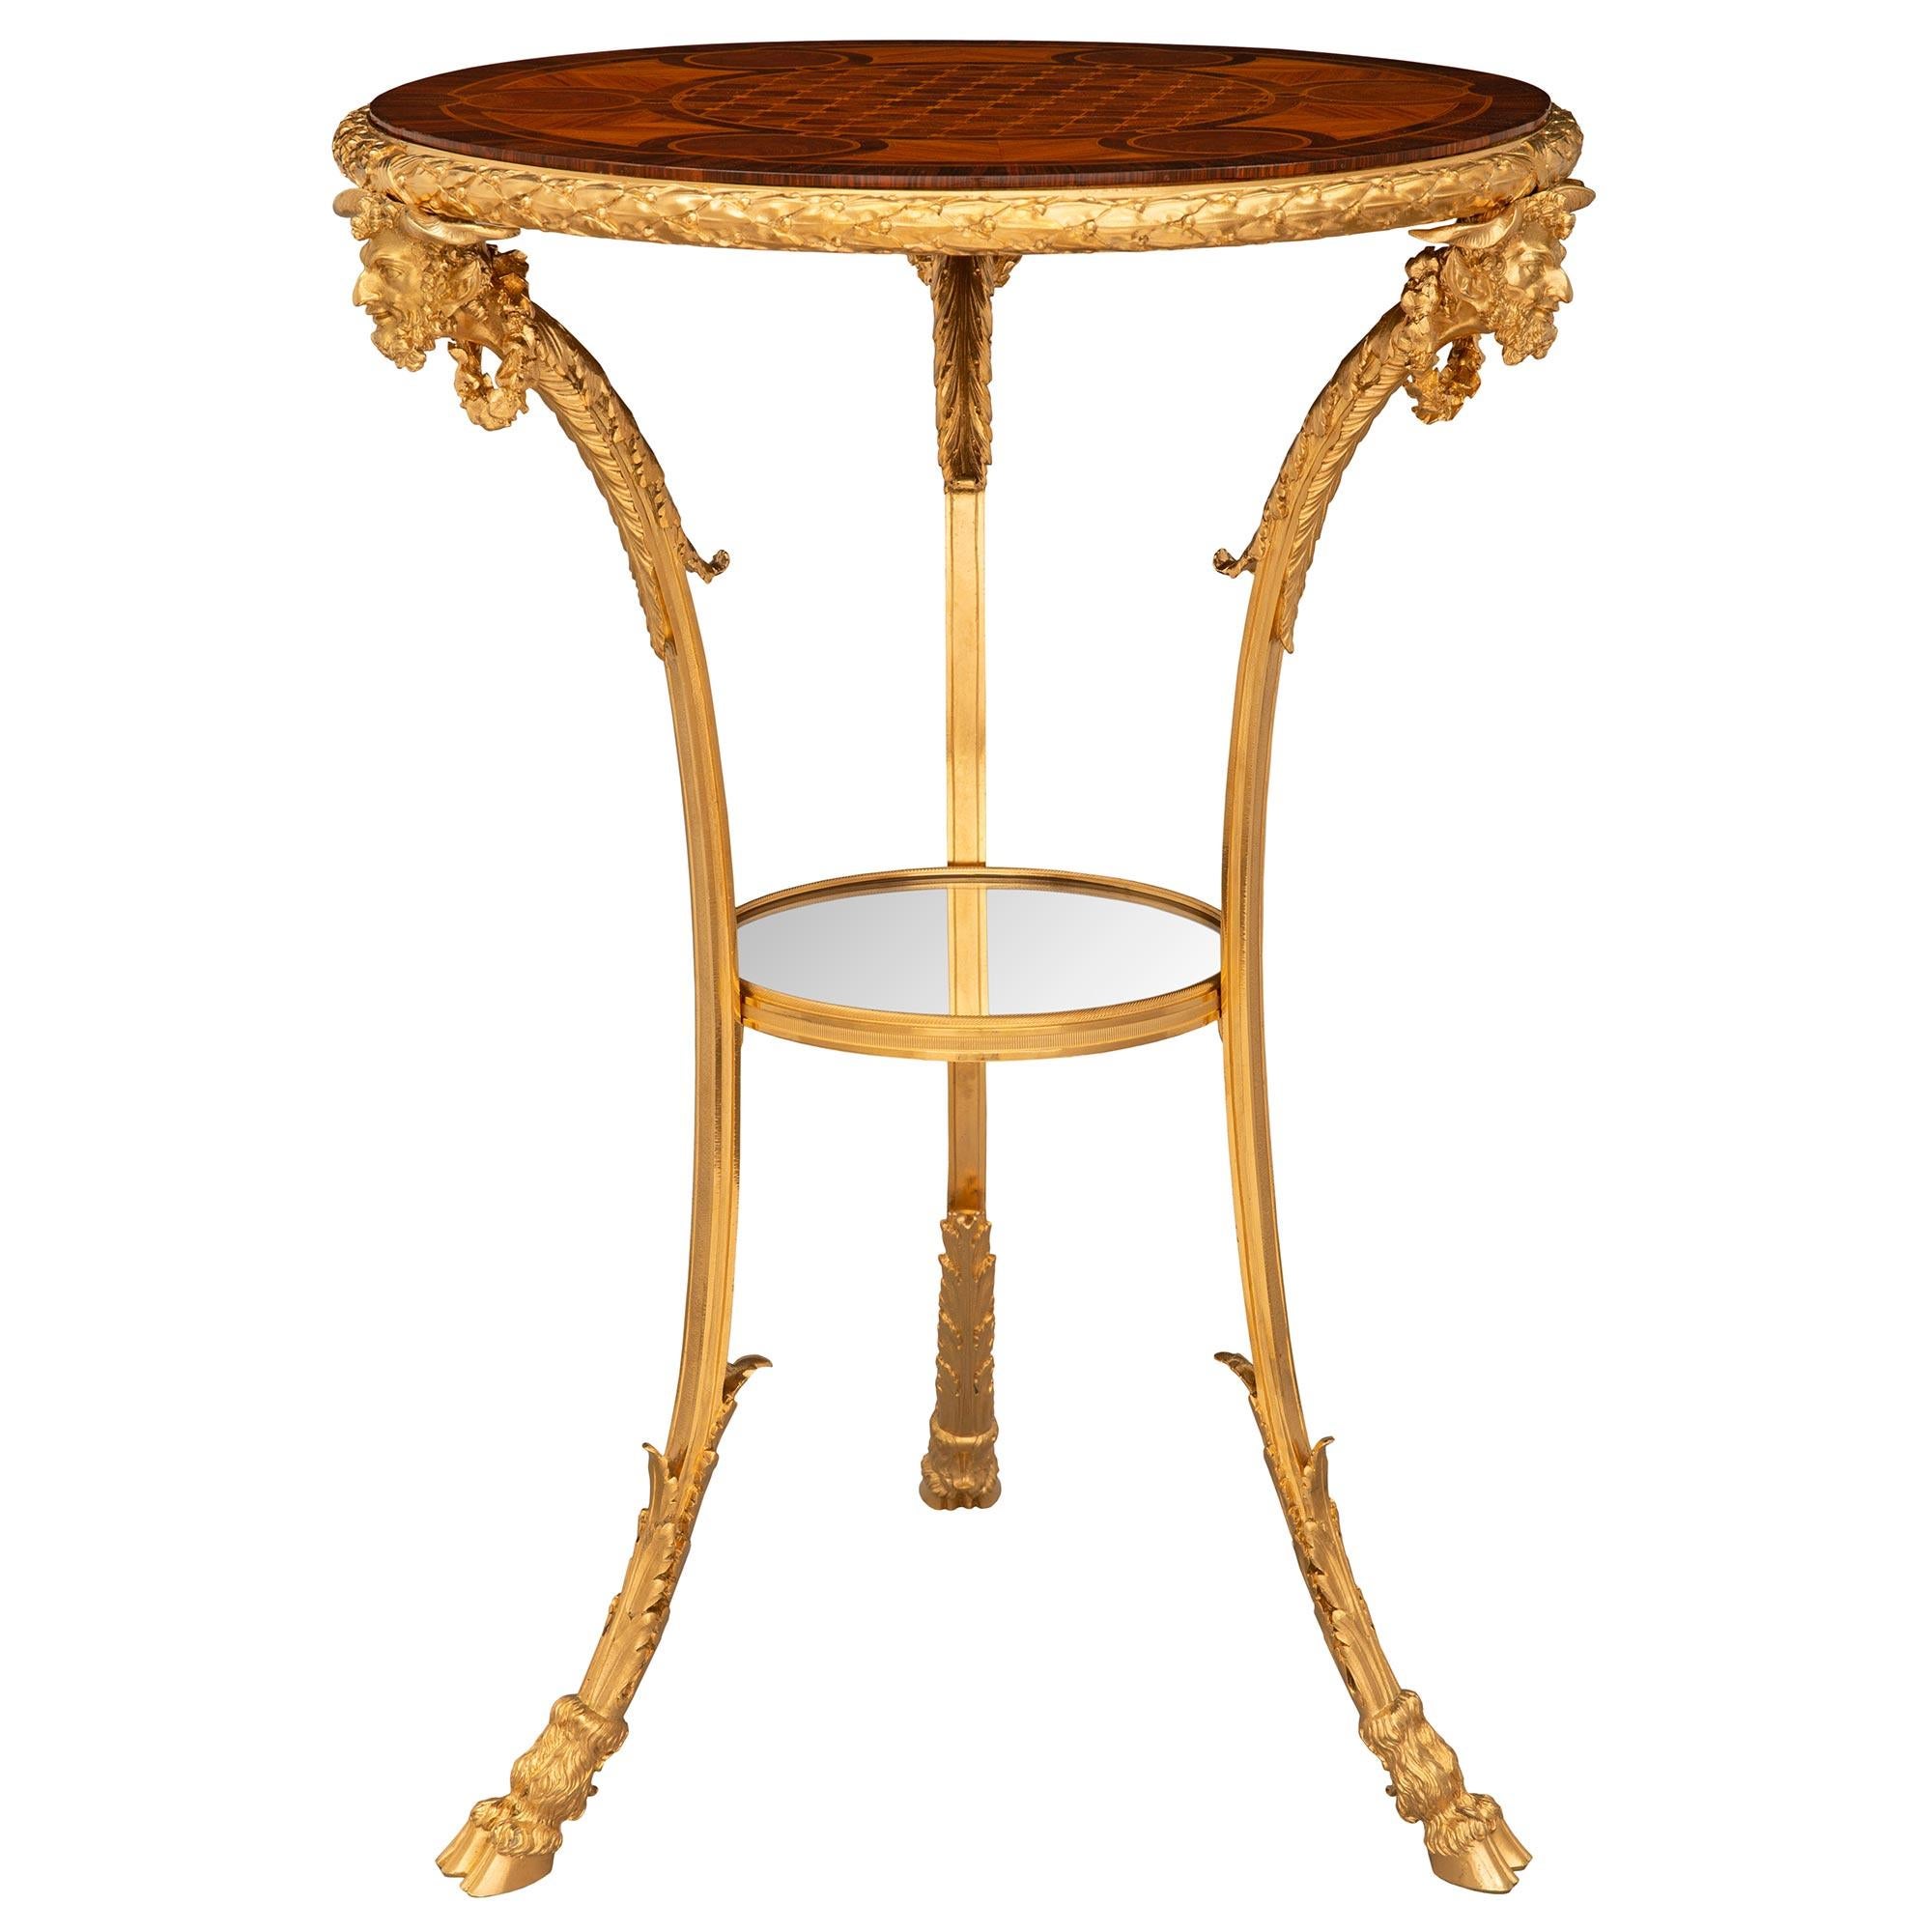 French 19th Century Belle Époque Period Kingwood, Tulipwood, Ormolu Side Table In Good Condition For Sale In West Palm Beach, FL